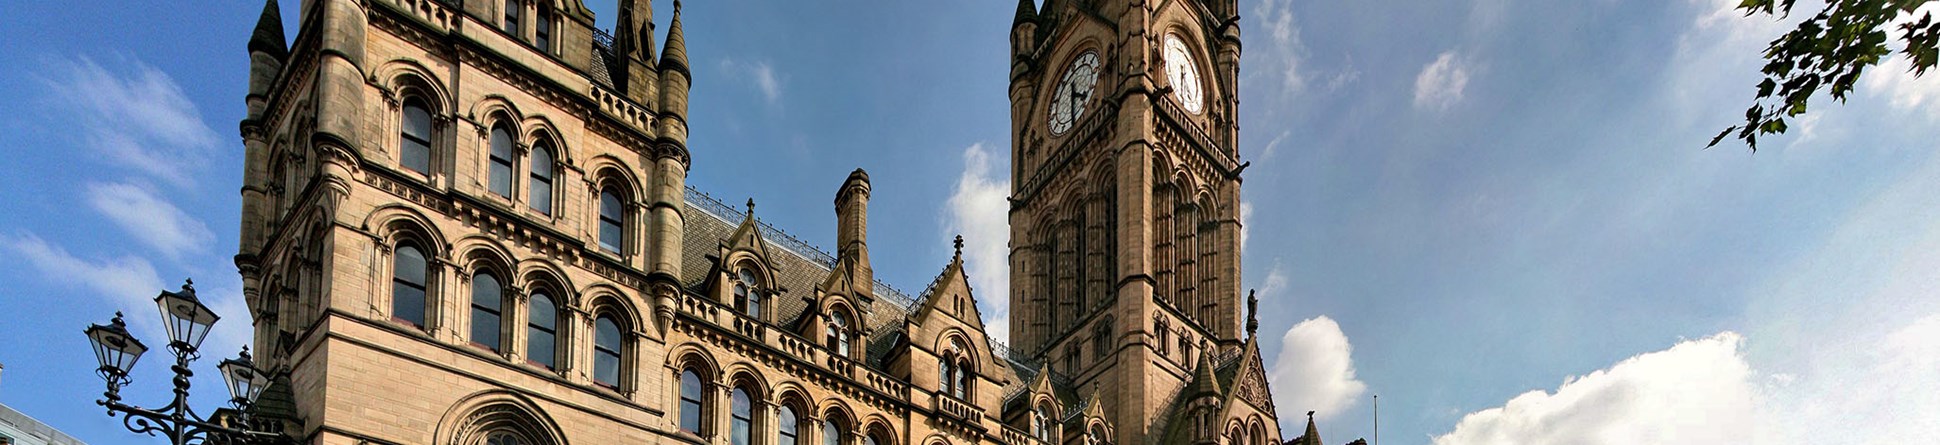 Image of the Grade I listed Manchester Town Hall